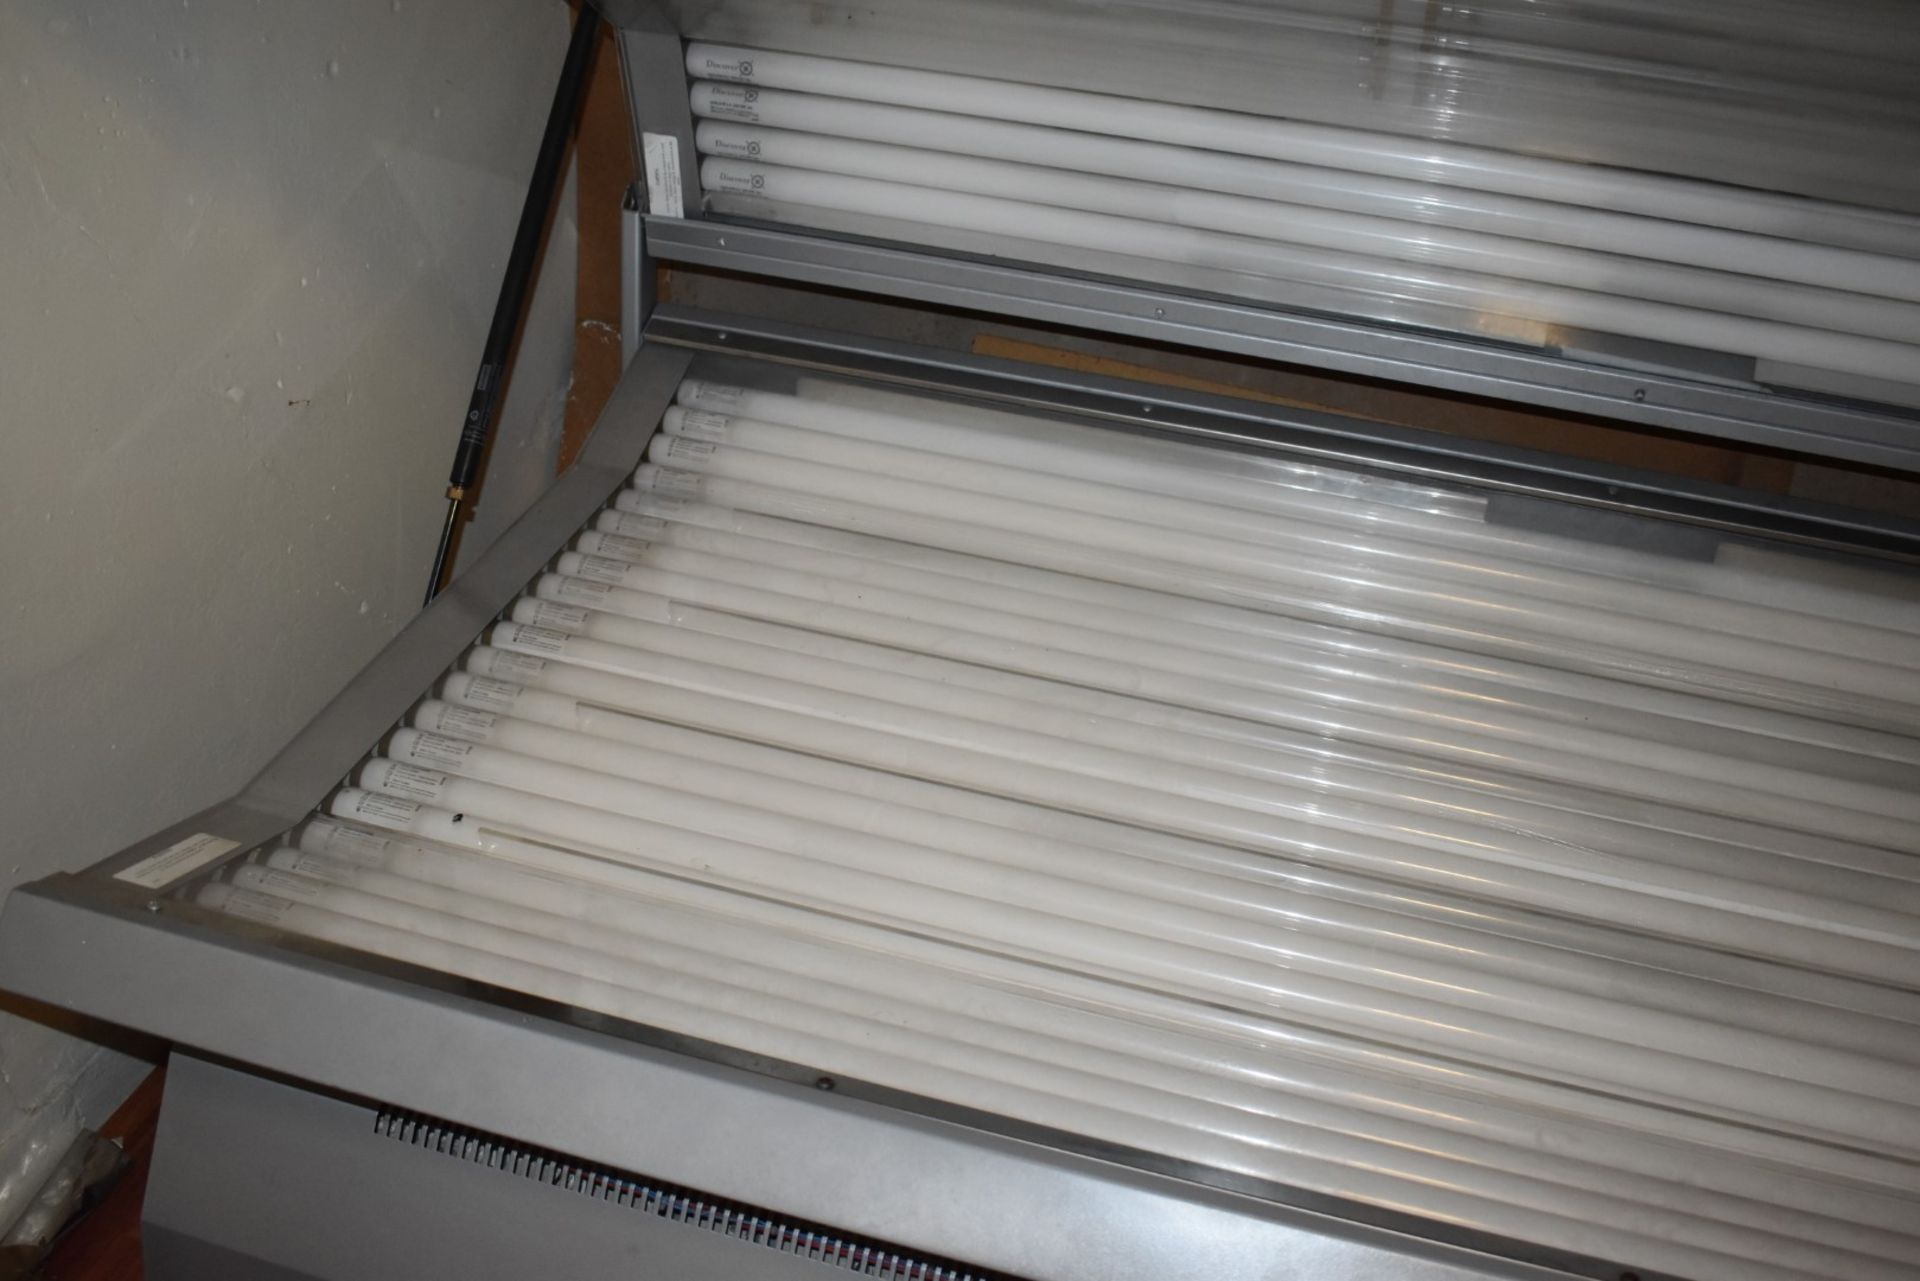 2 x Tanning Sunbeds to Include 1 x Laydown Sunbed and 1 x Standing Sunbed - Ideal For Gyms, Sunbed - Image 4 of 24